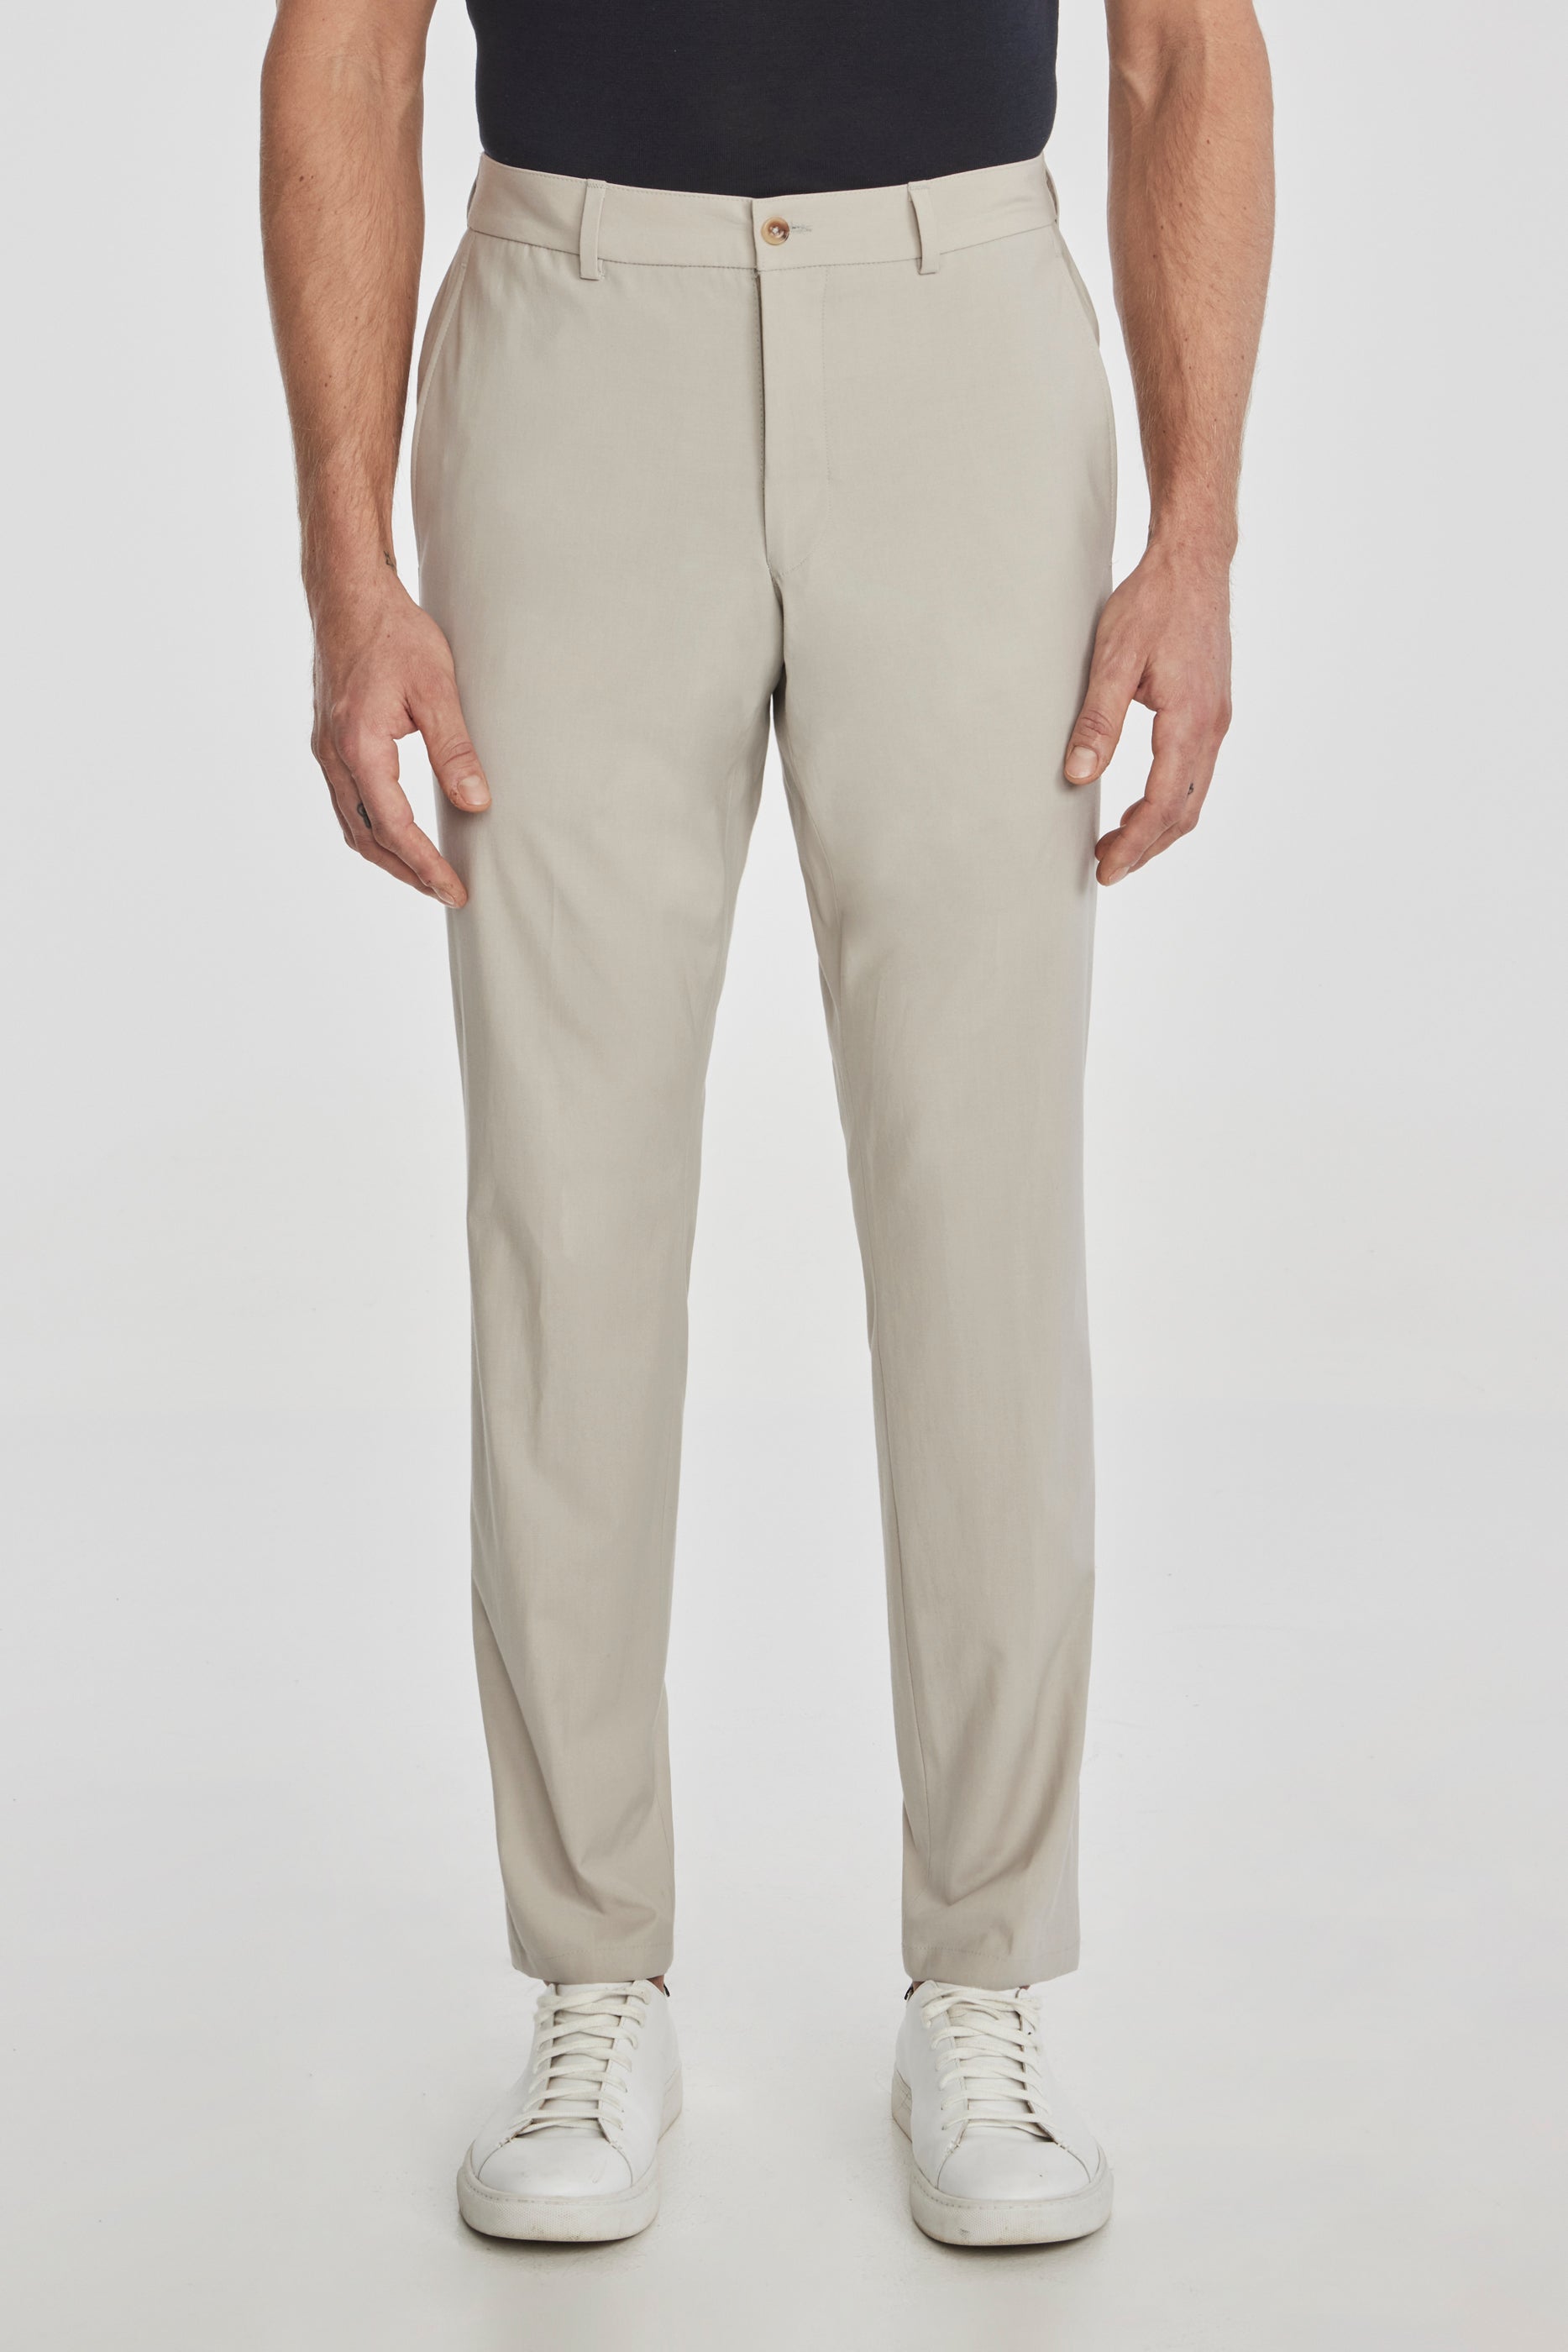 Alt view Perth Wool and Cotton Stretch Pant in Tan